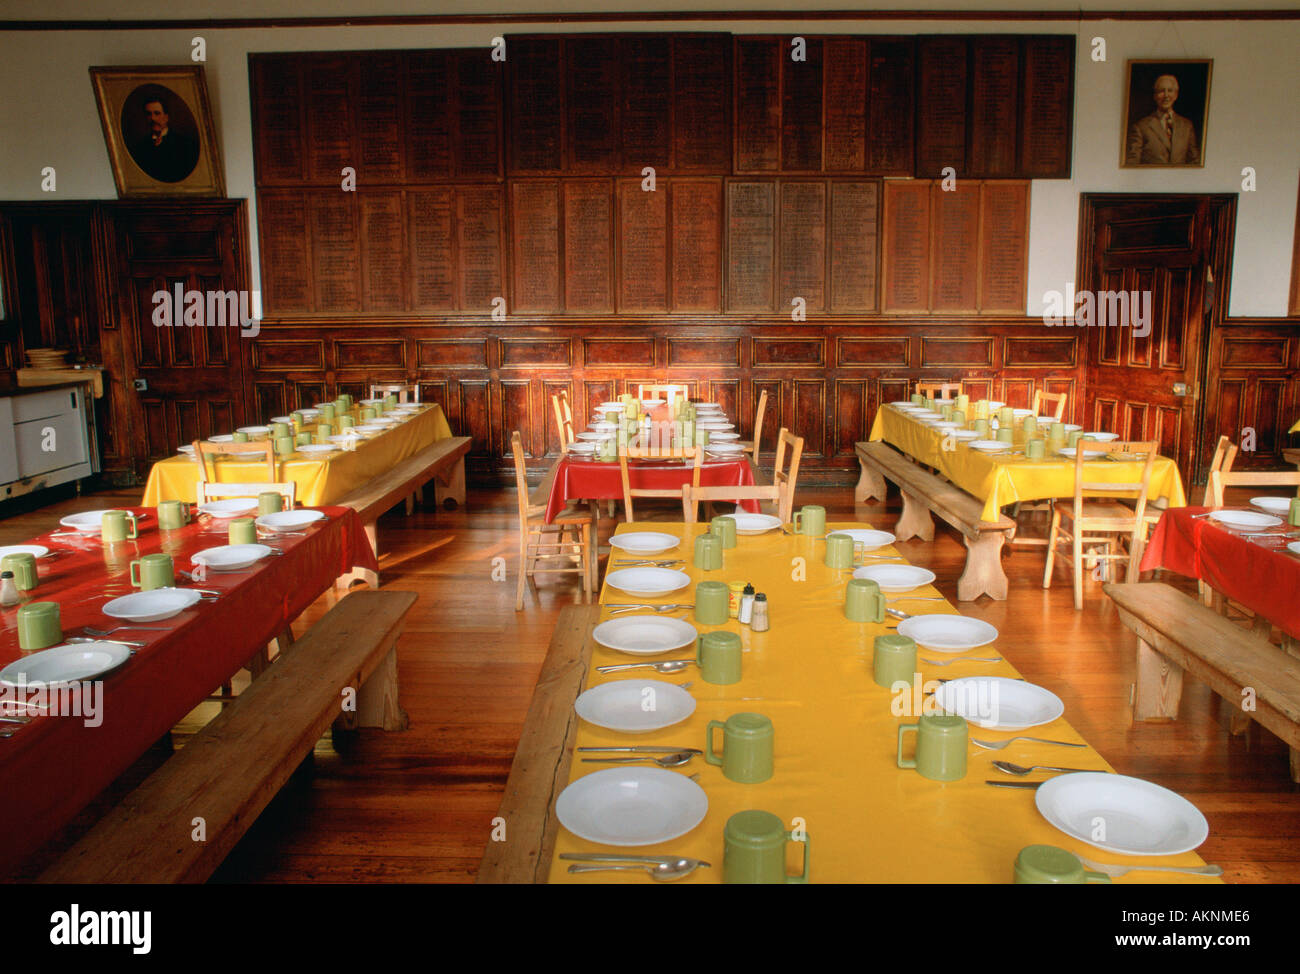 Dining Room At Ludgrove Boarding School For Boys In